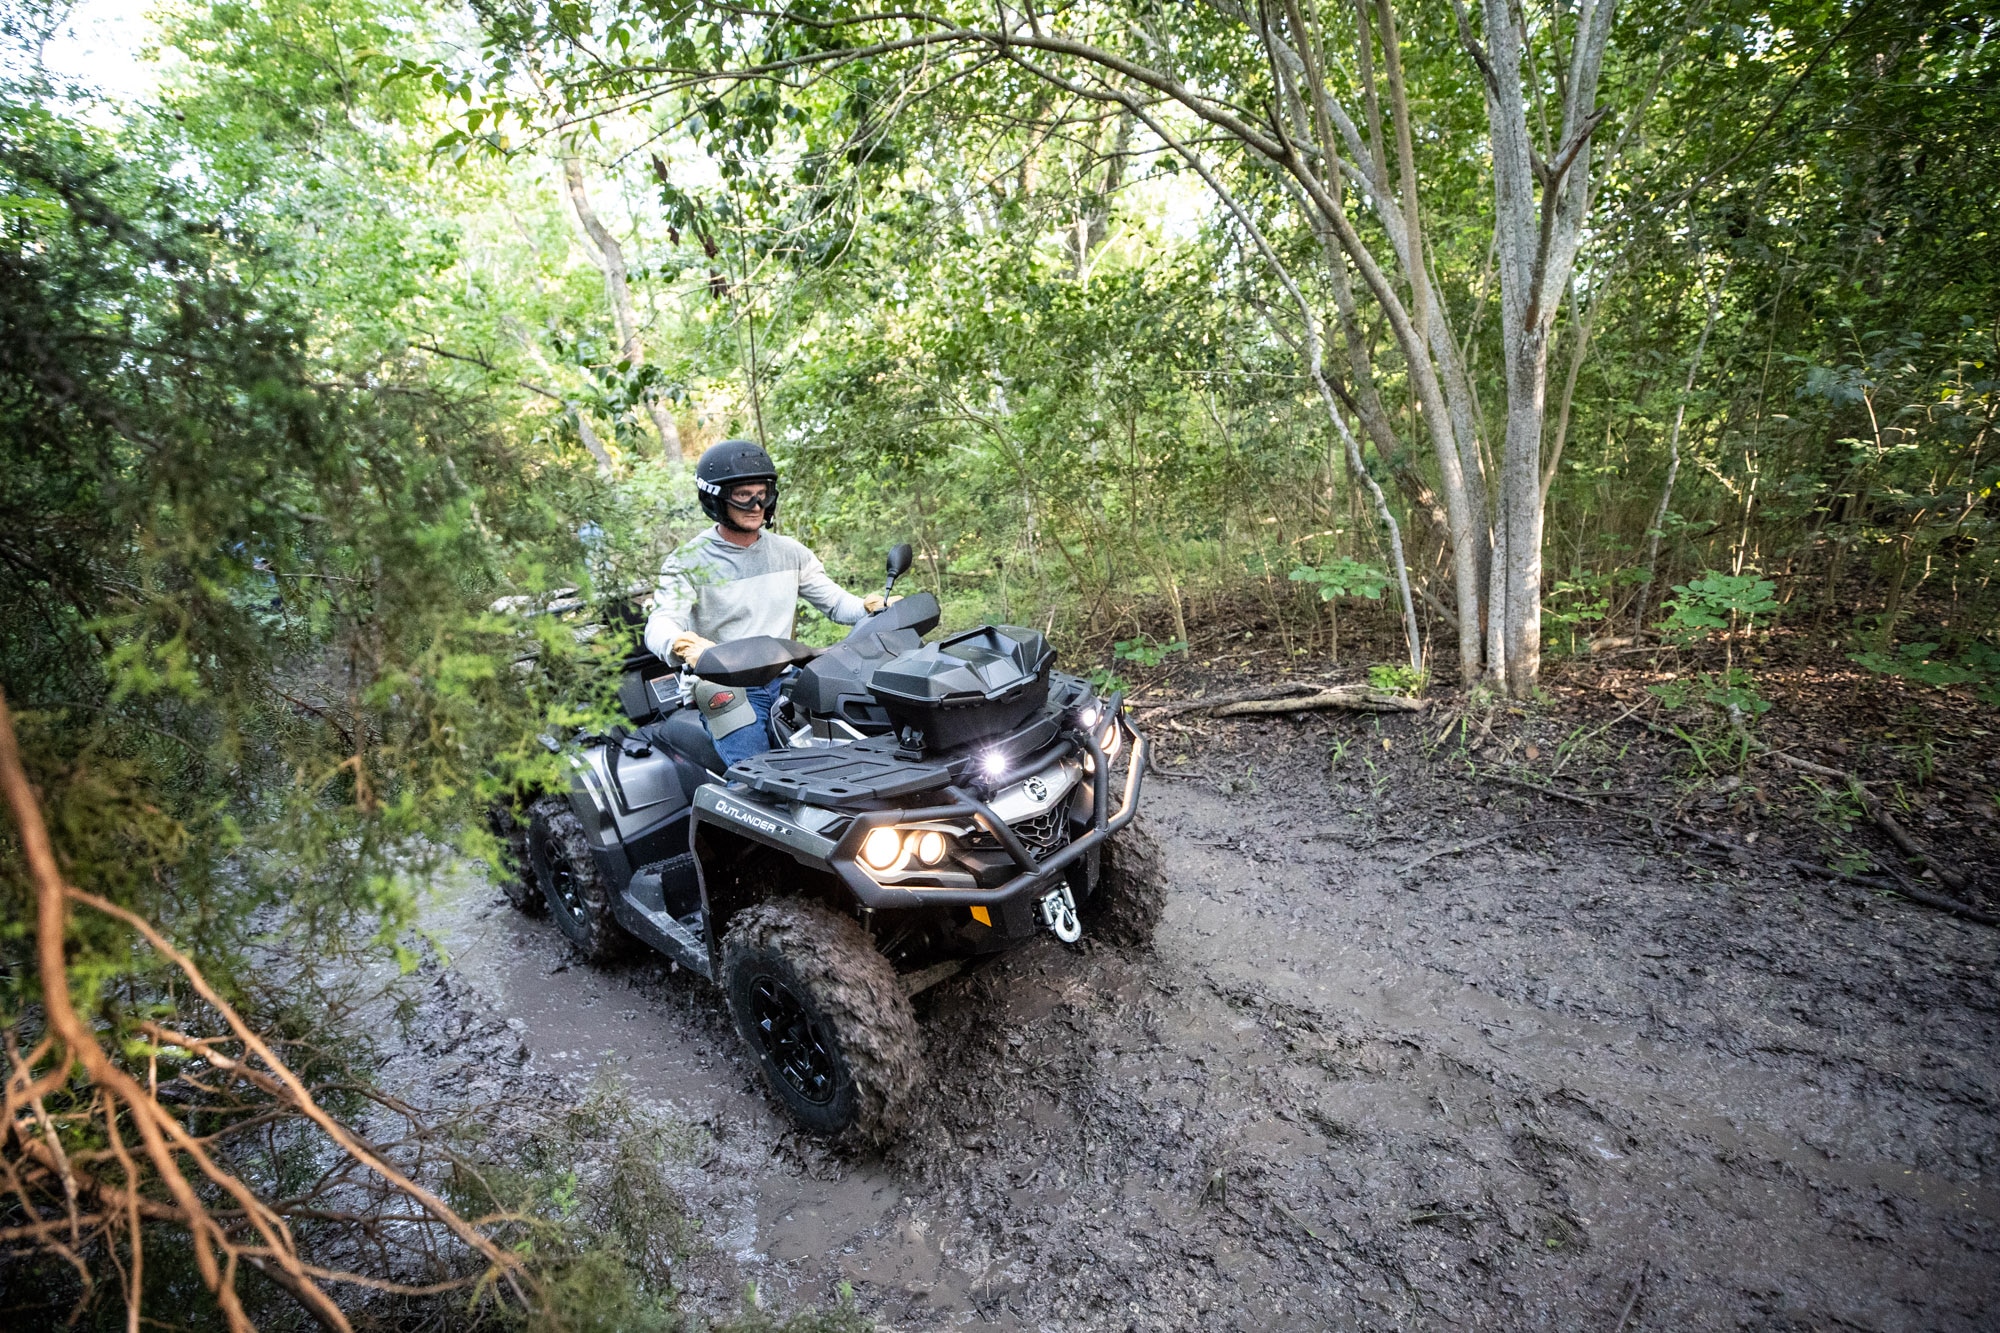 ATV industry leading towing capacity 1650lb